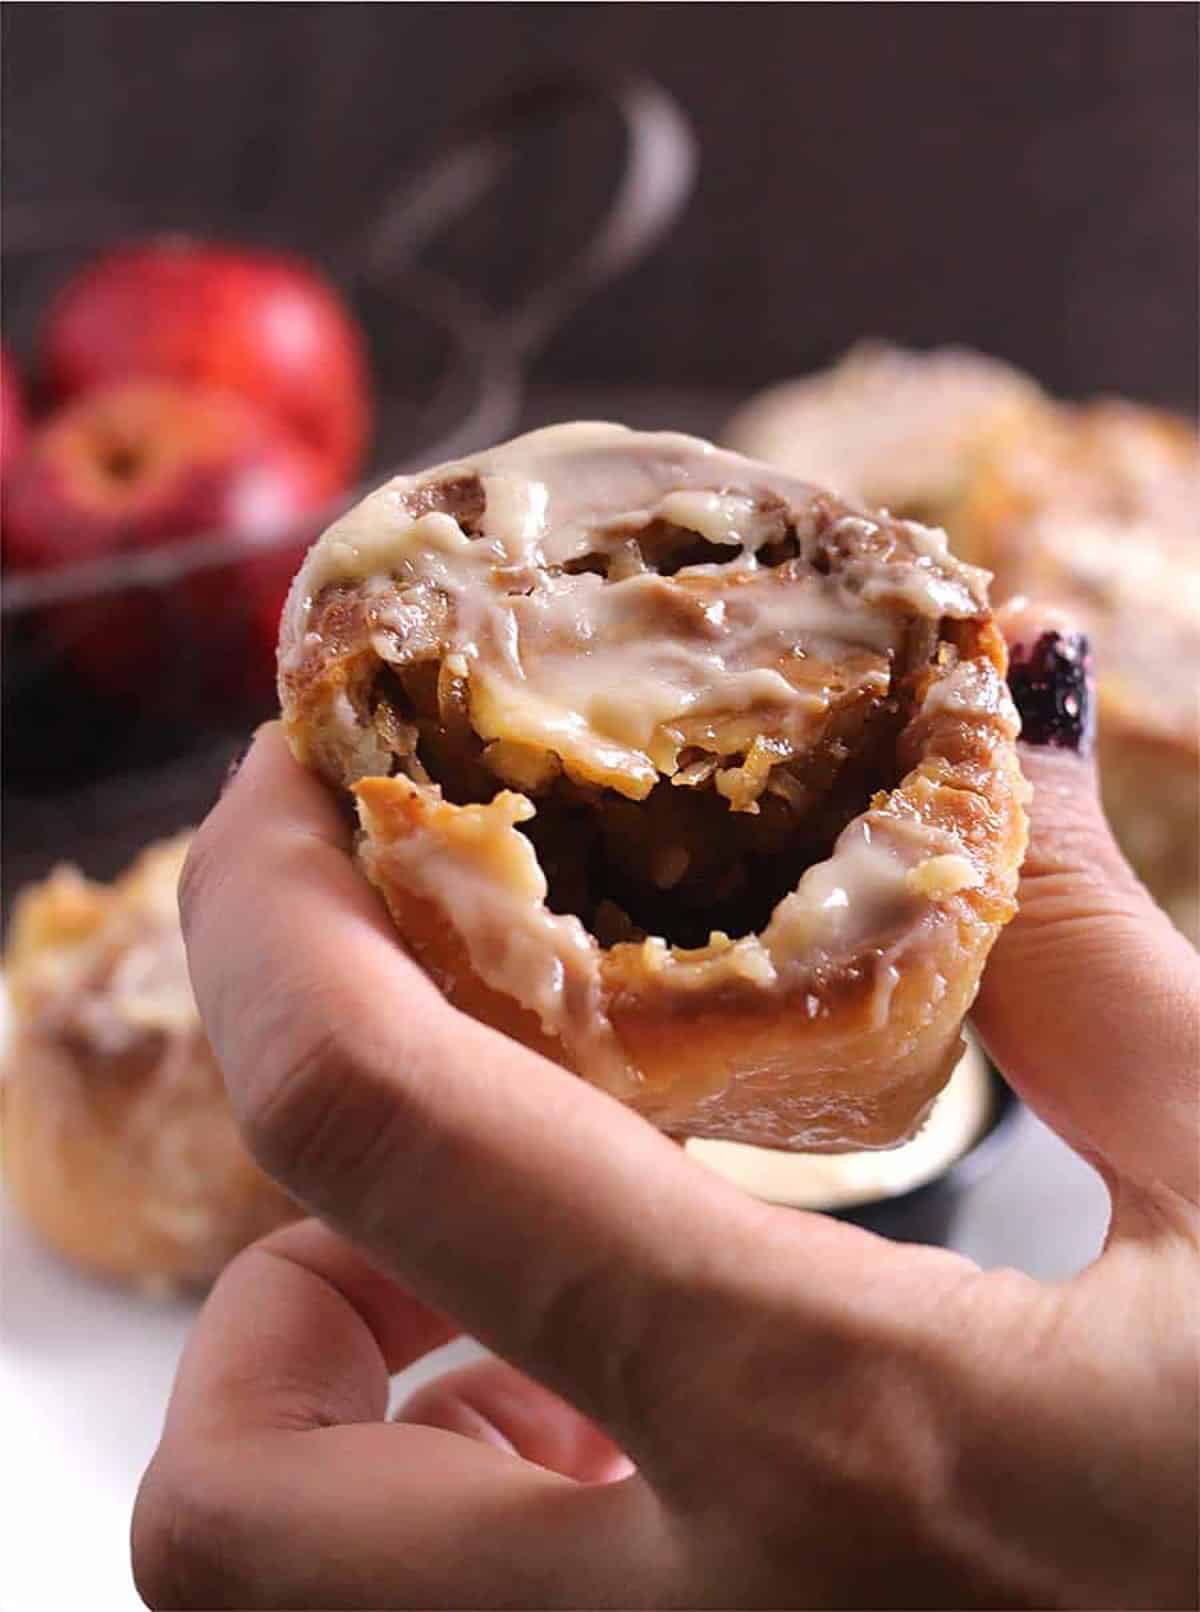 Holding the best homemade cinnamon rolls with the apple pie filling